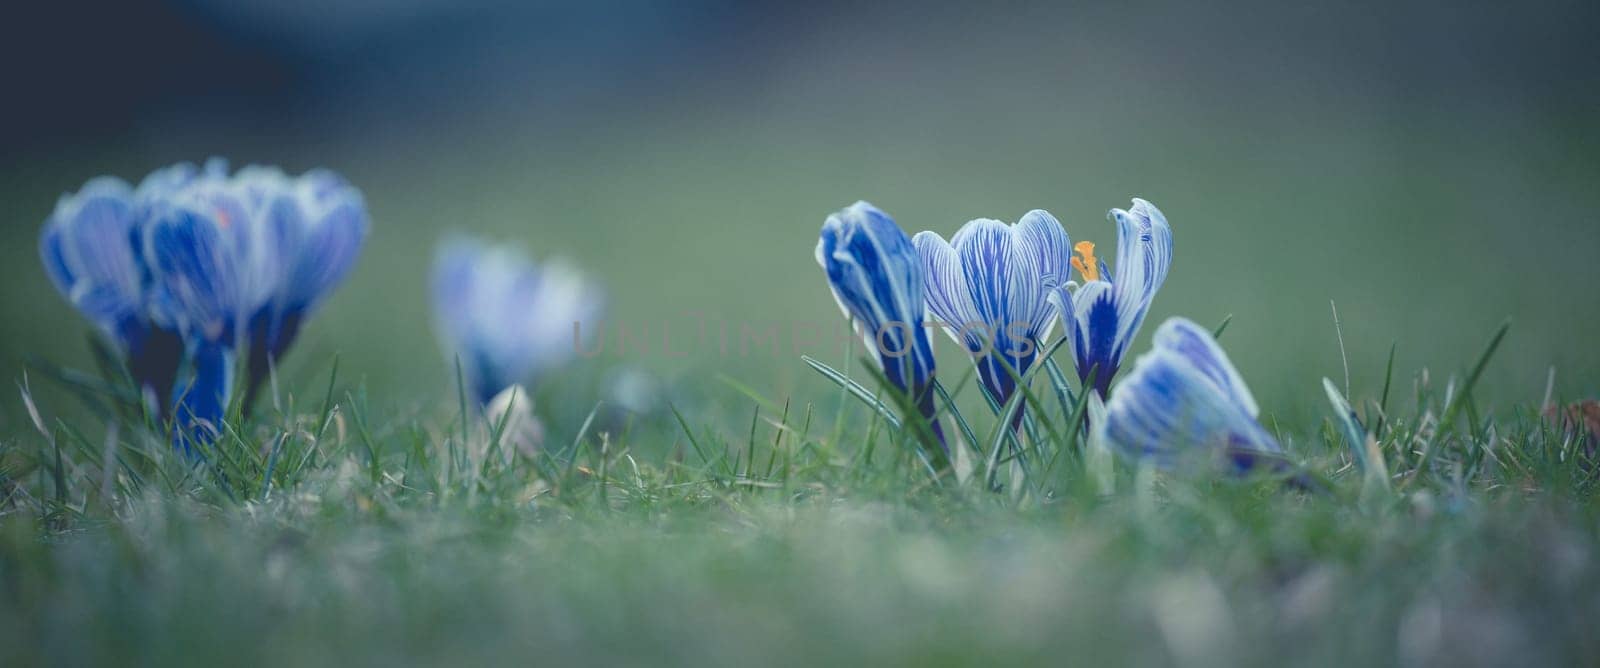 Blooming blue crocuses with green leaves in the garden, spring flowers by ndanko